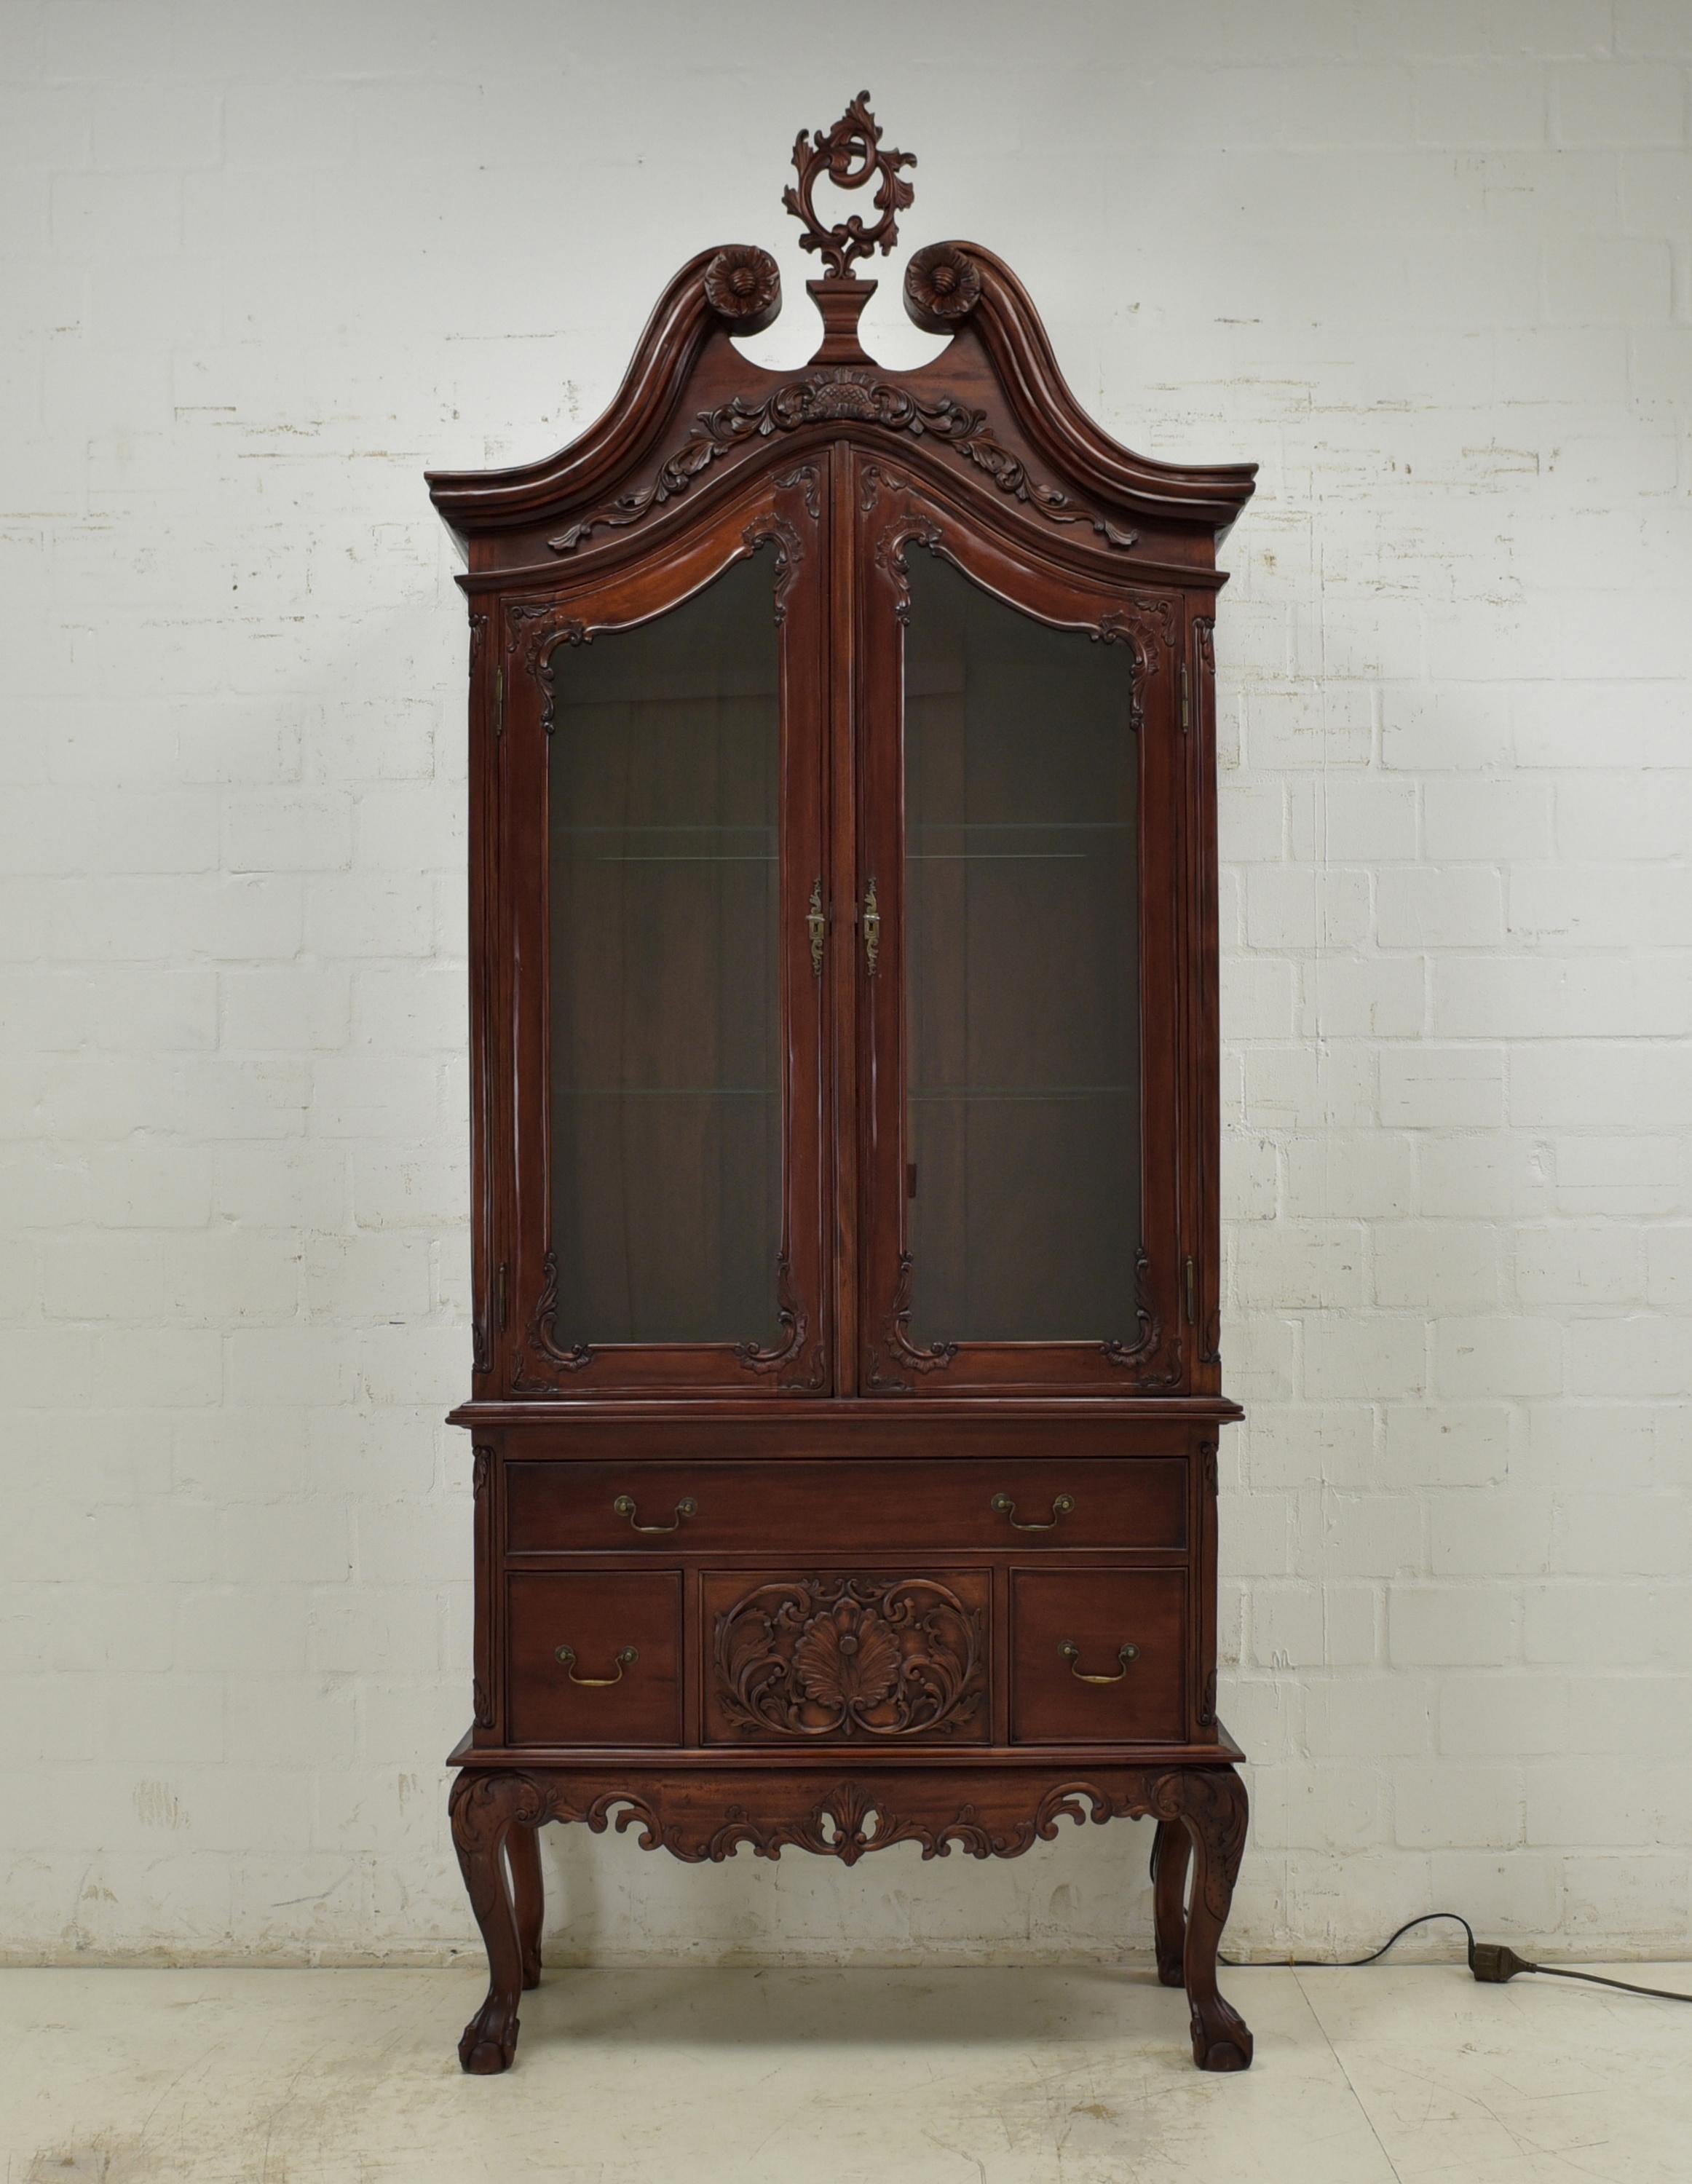 Display cabinet Baroque style / English style mahogany reproduction period furniture

Features:
Completely solid mahogany
2-door showcase top with glass shelves
High-legged base with 4 drawers
Very high-quality, manual processing
Drawers